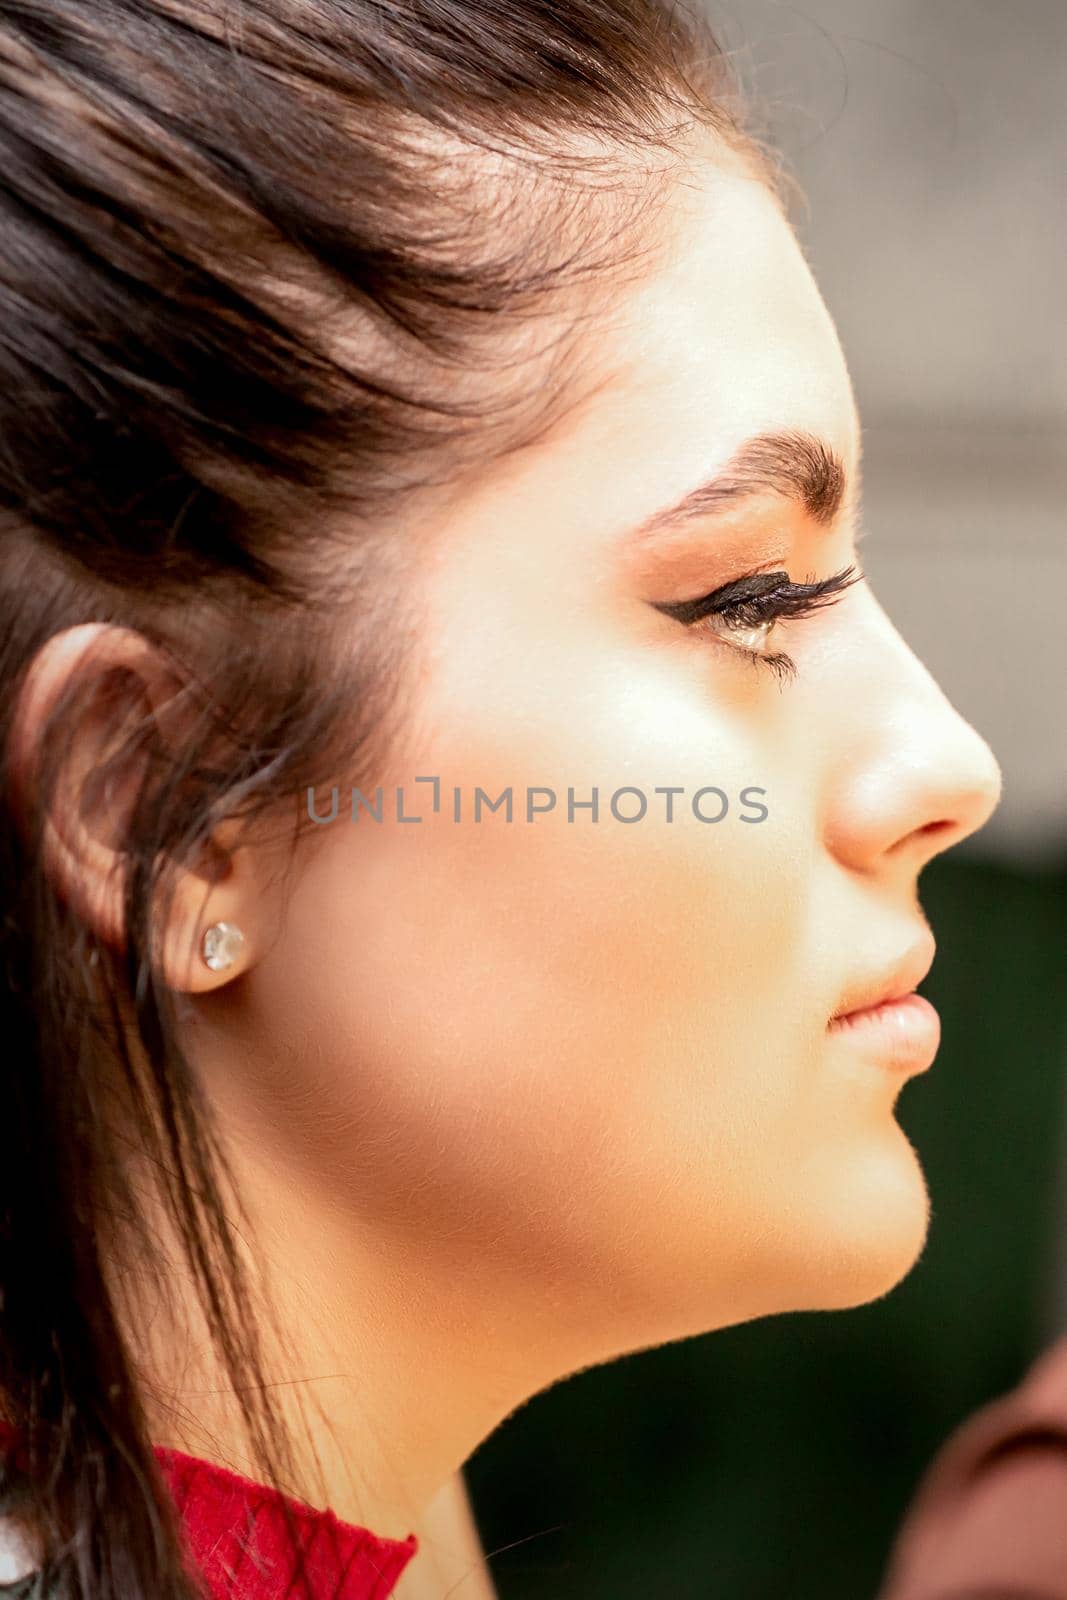 Profile portrait of the beautiful female model with long hair and makeup with a makeup artist in a beauty salon